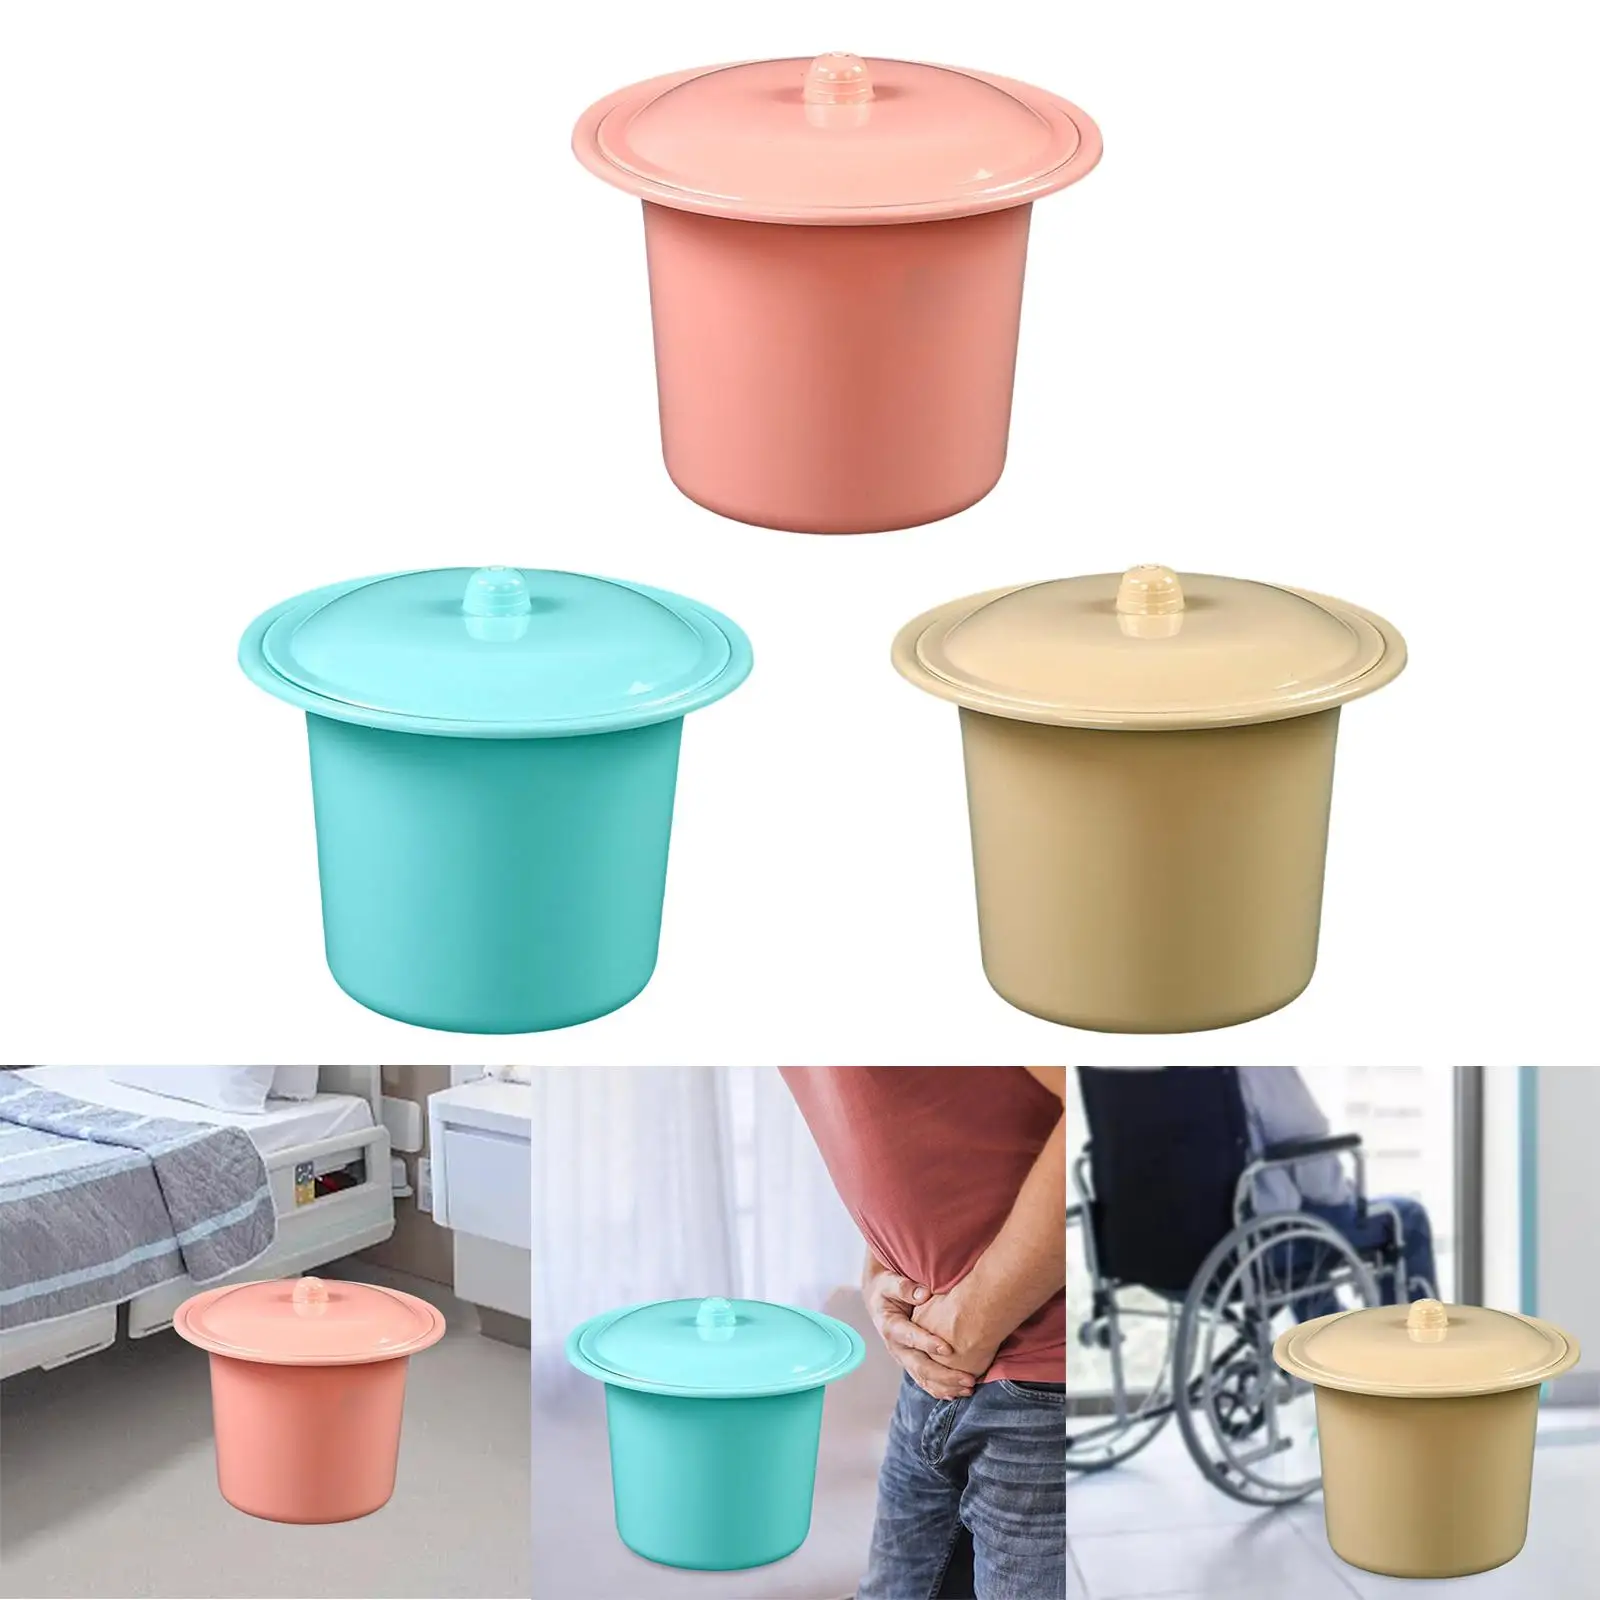 Compact Spittoon with Lid Splashproof Durable Urinal Pot Pee Potty Mobile Toilet for Outdoor Emergency Camping Car Elderly